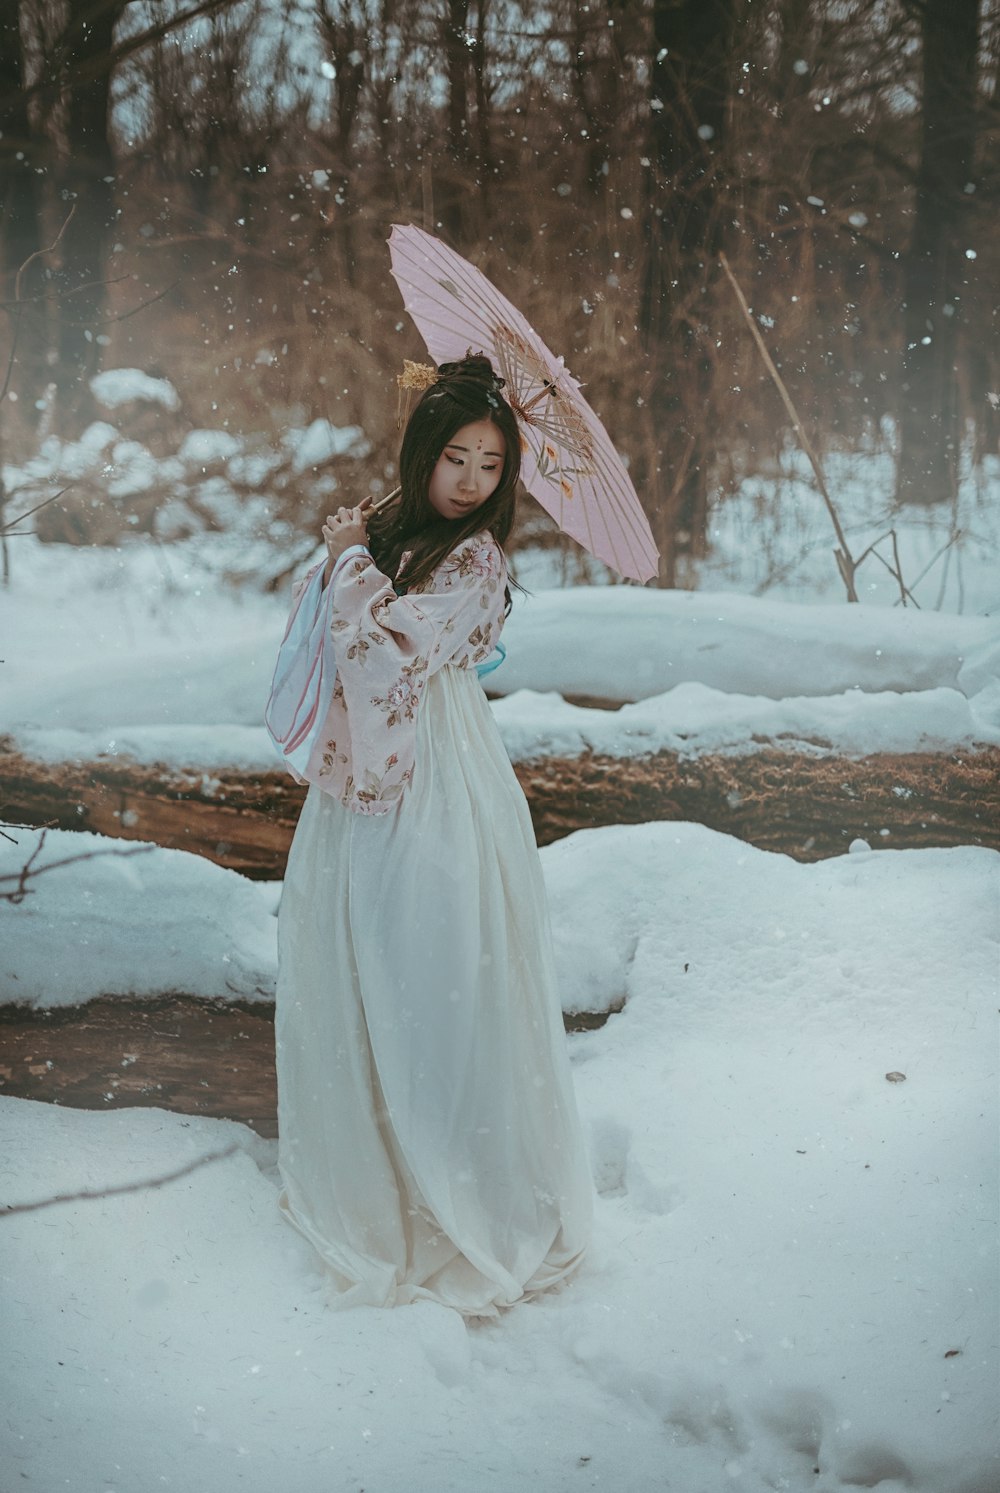 a woman in a white dress holding an umbrella in the snow